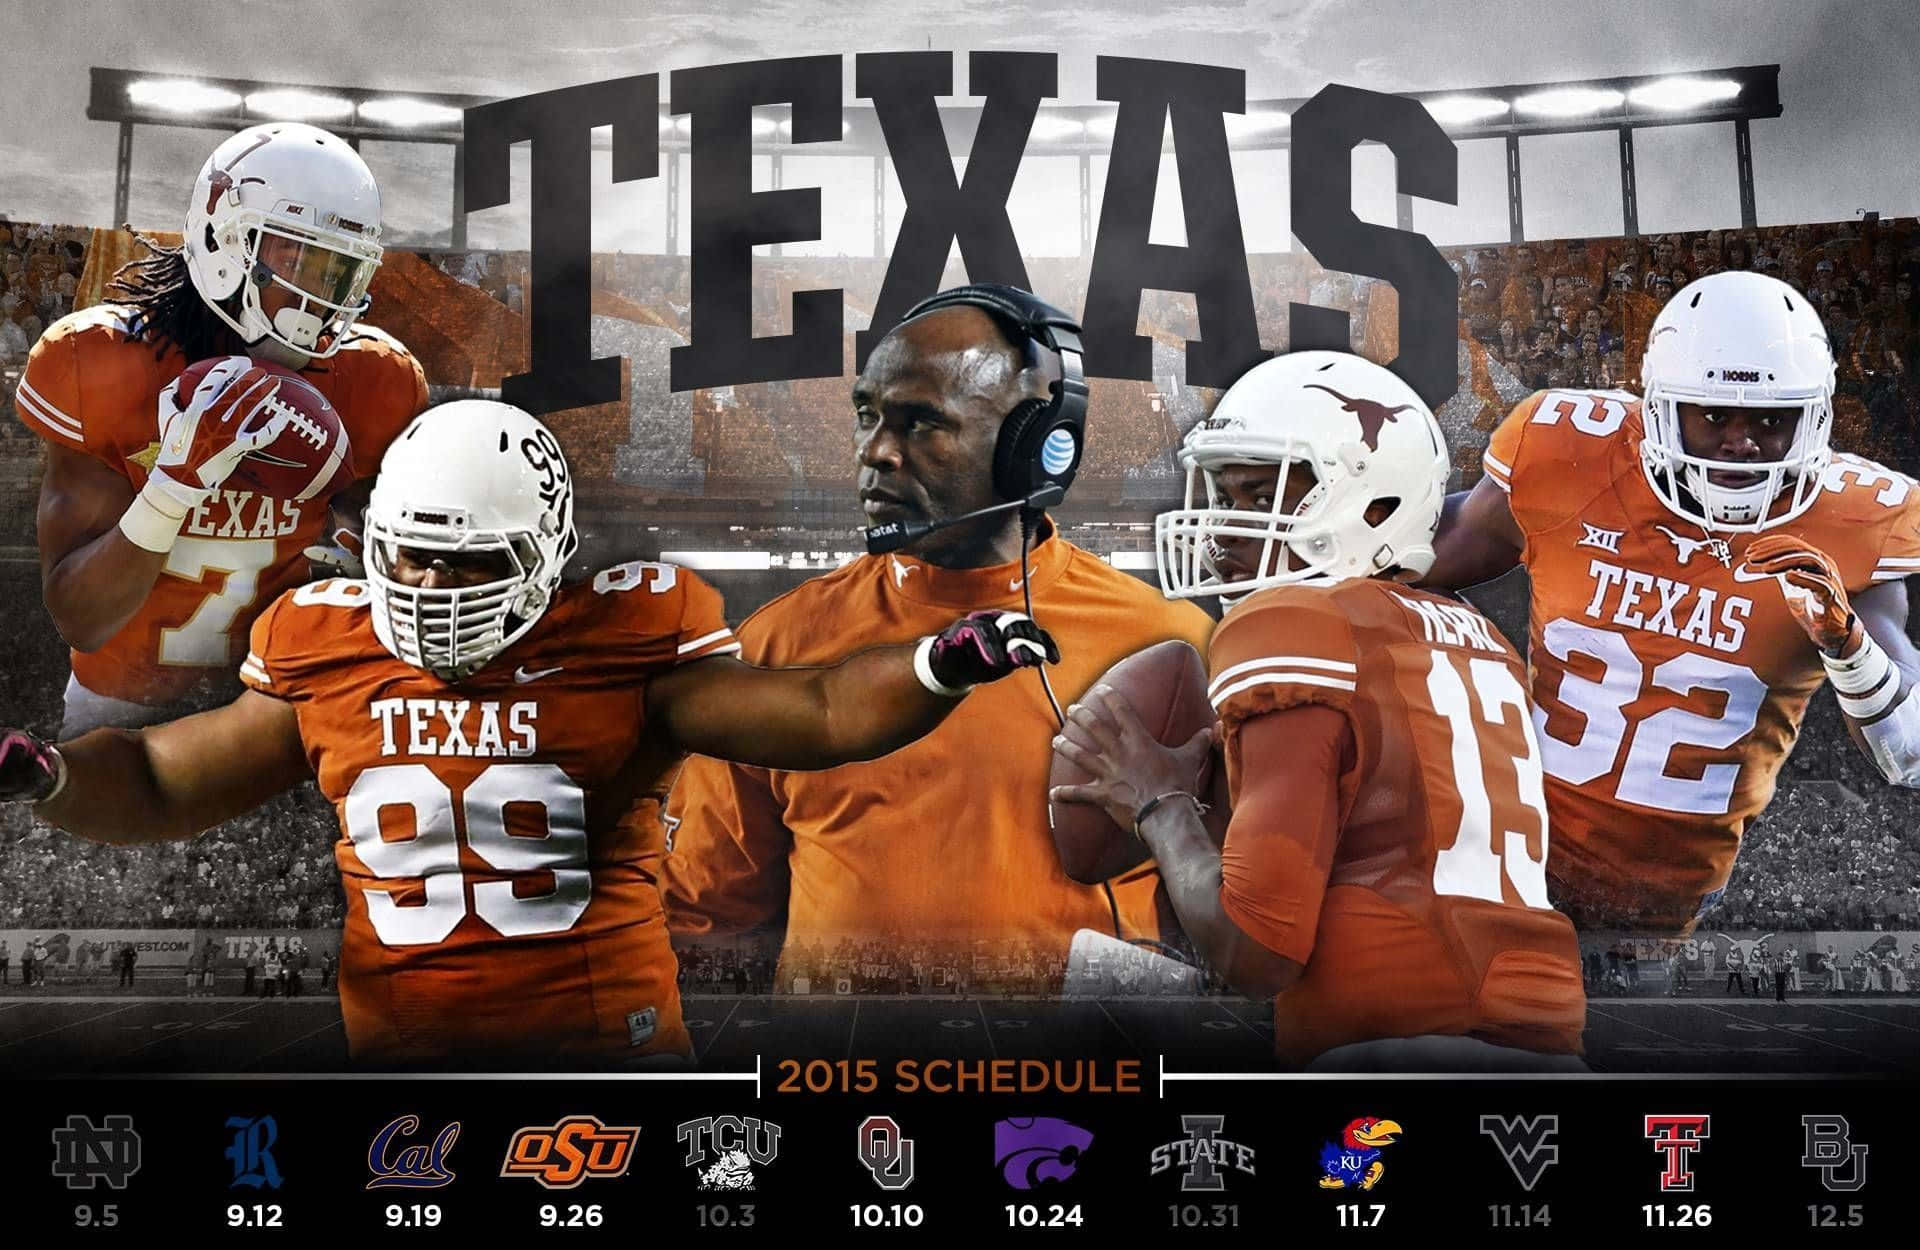 Texas Football Fans Celebrate Another Big Win. Wallpaper